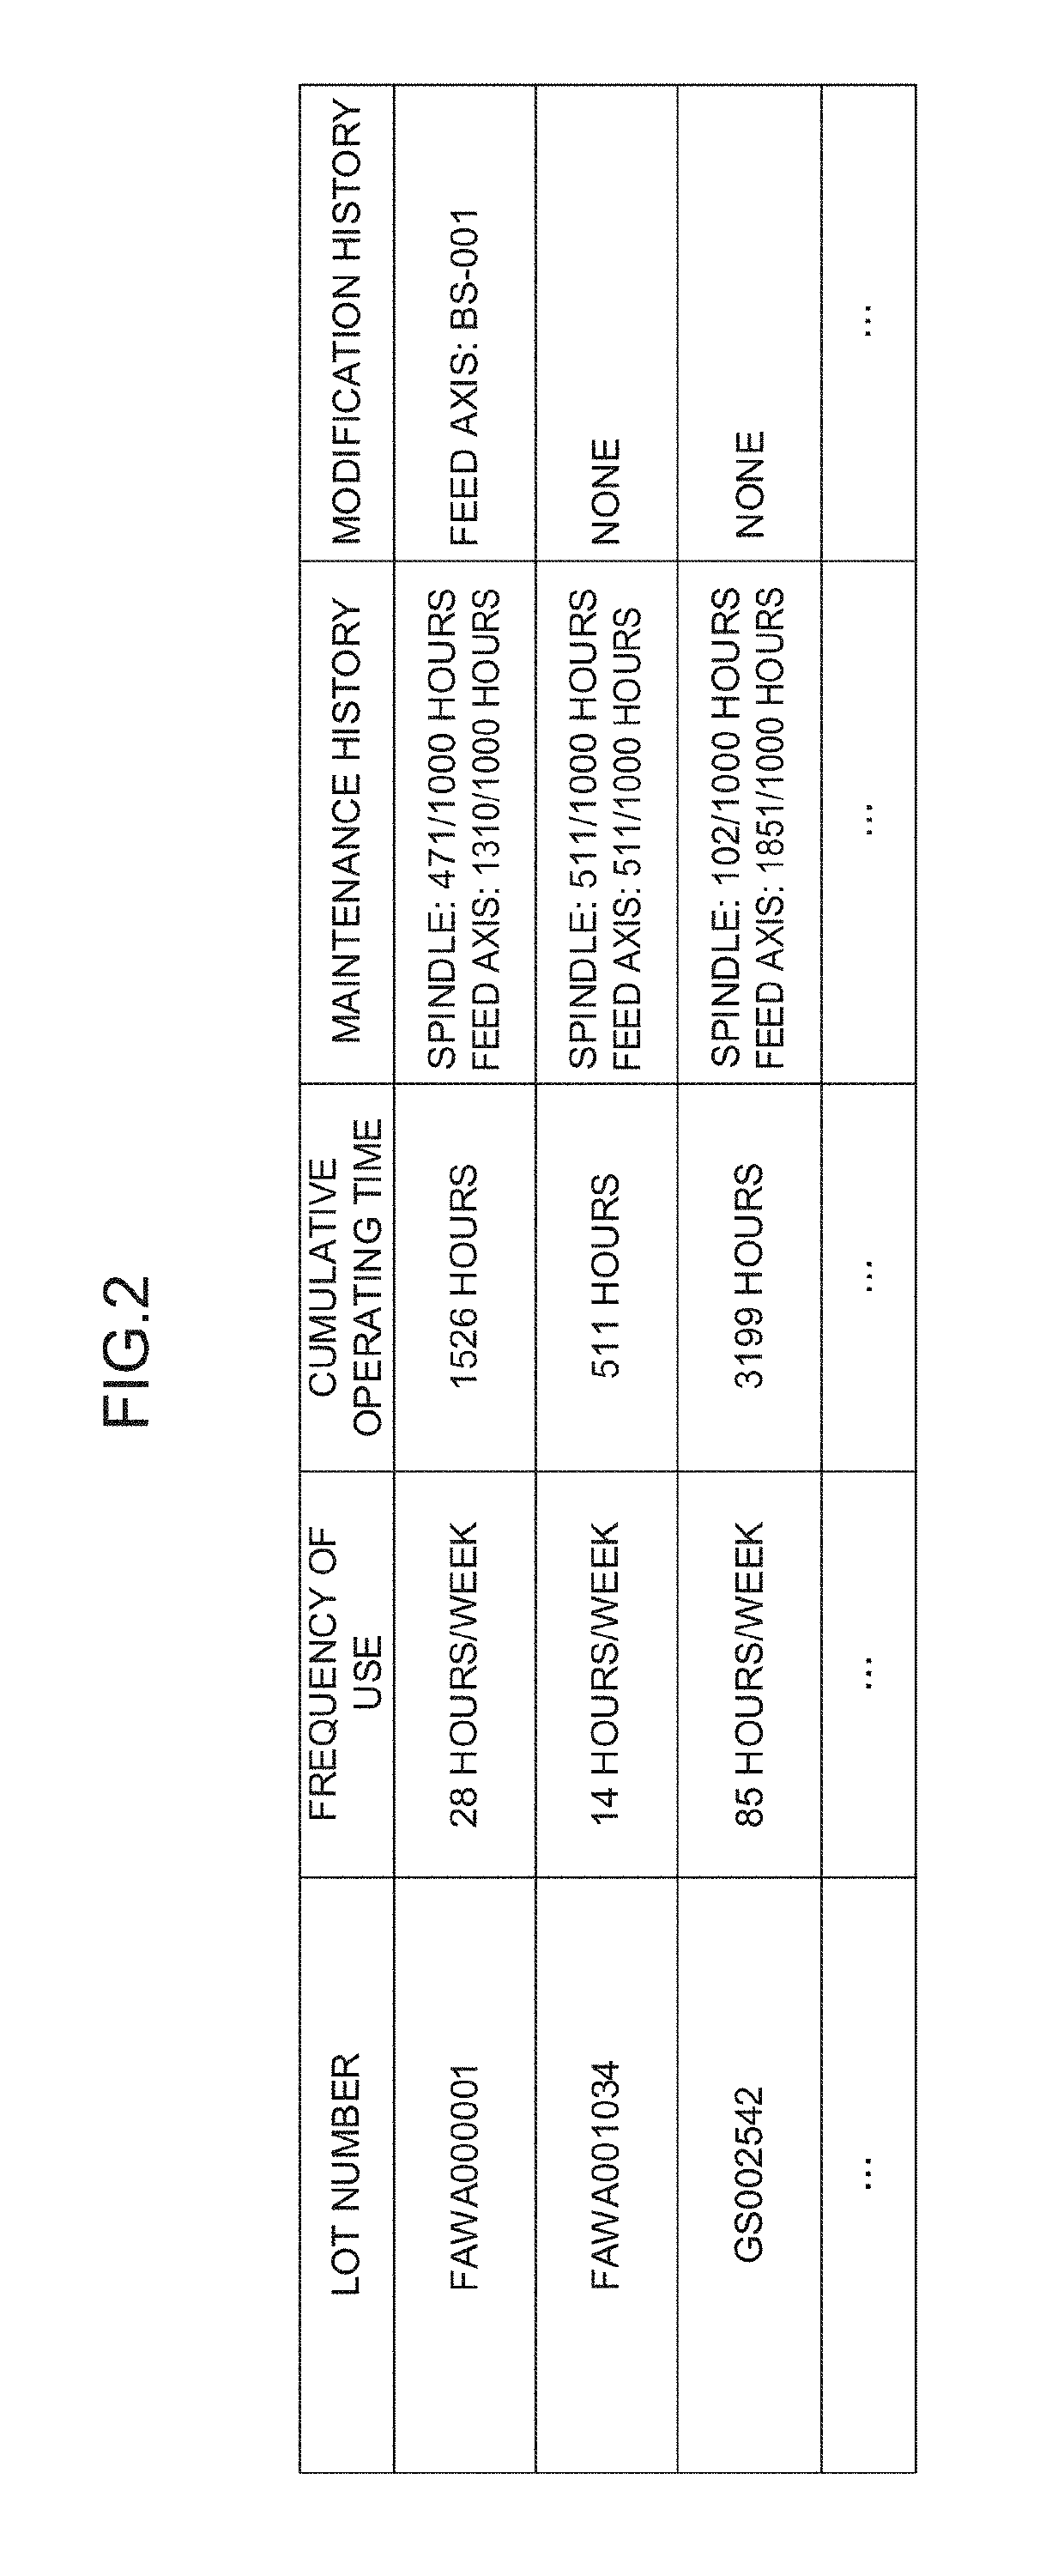 Thermal displacement compensation system